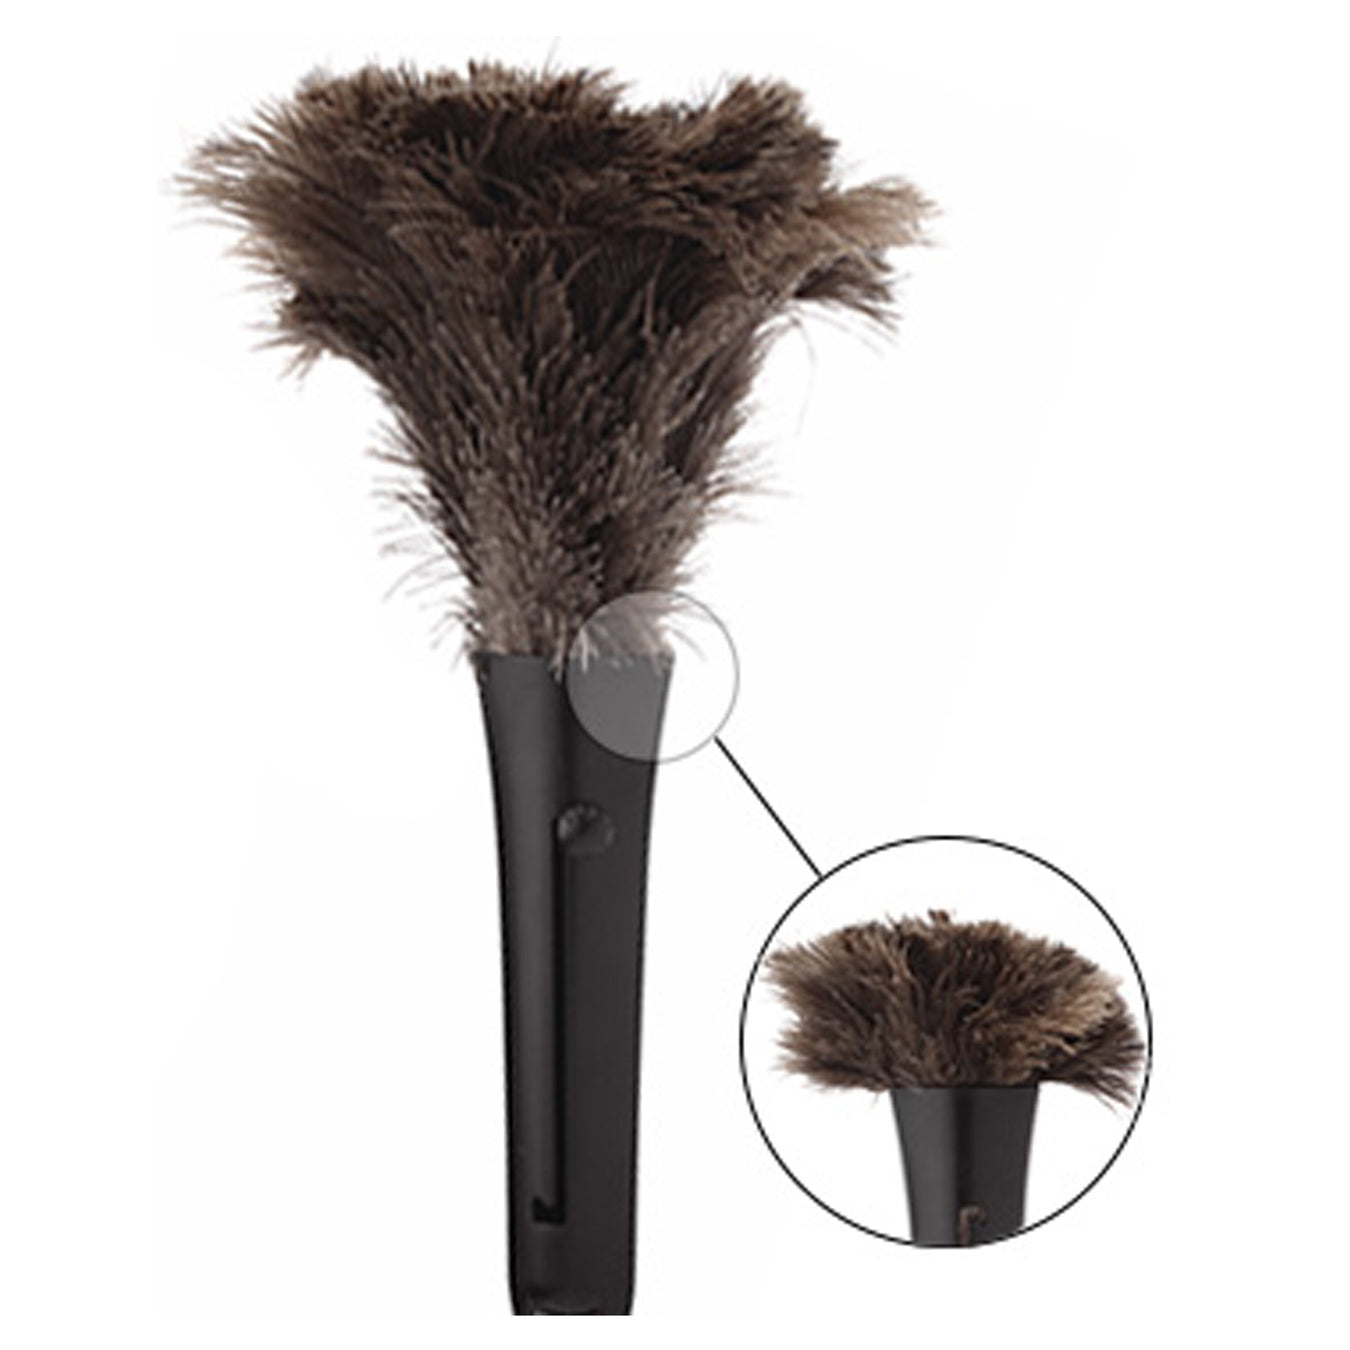 Lambskin Specialties Premium Retractable Feather Duster - 7" plume, 16" overall